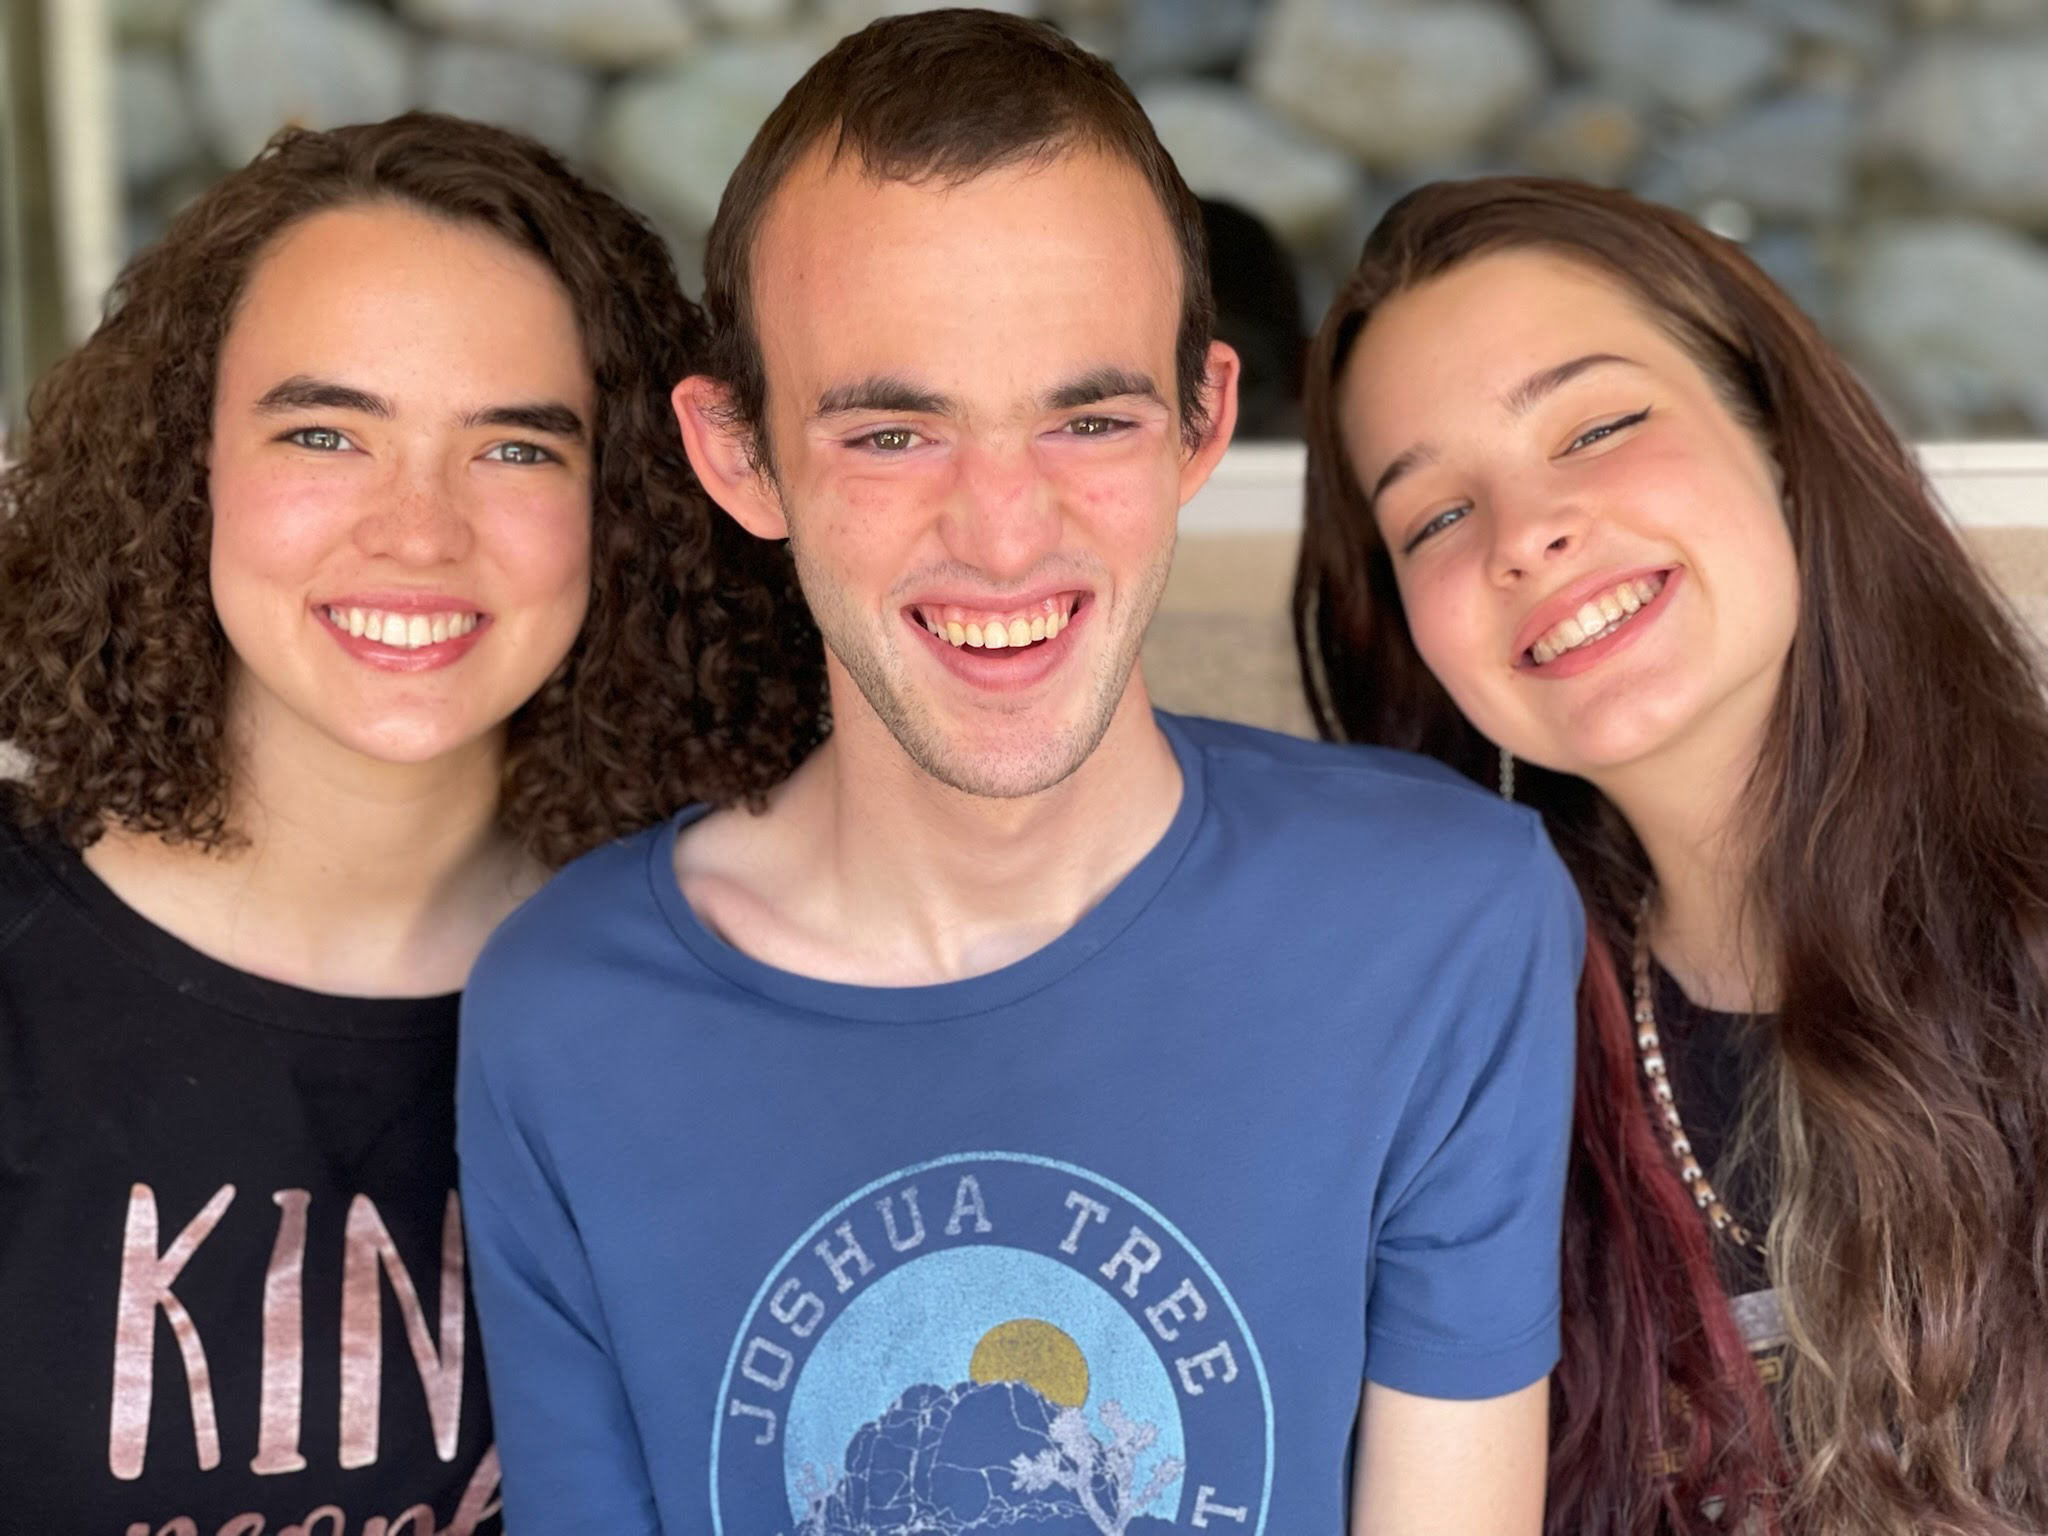 A Young man smiles with his two sisters at his side